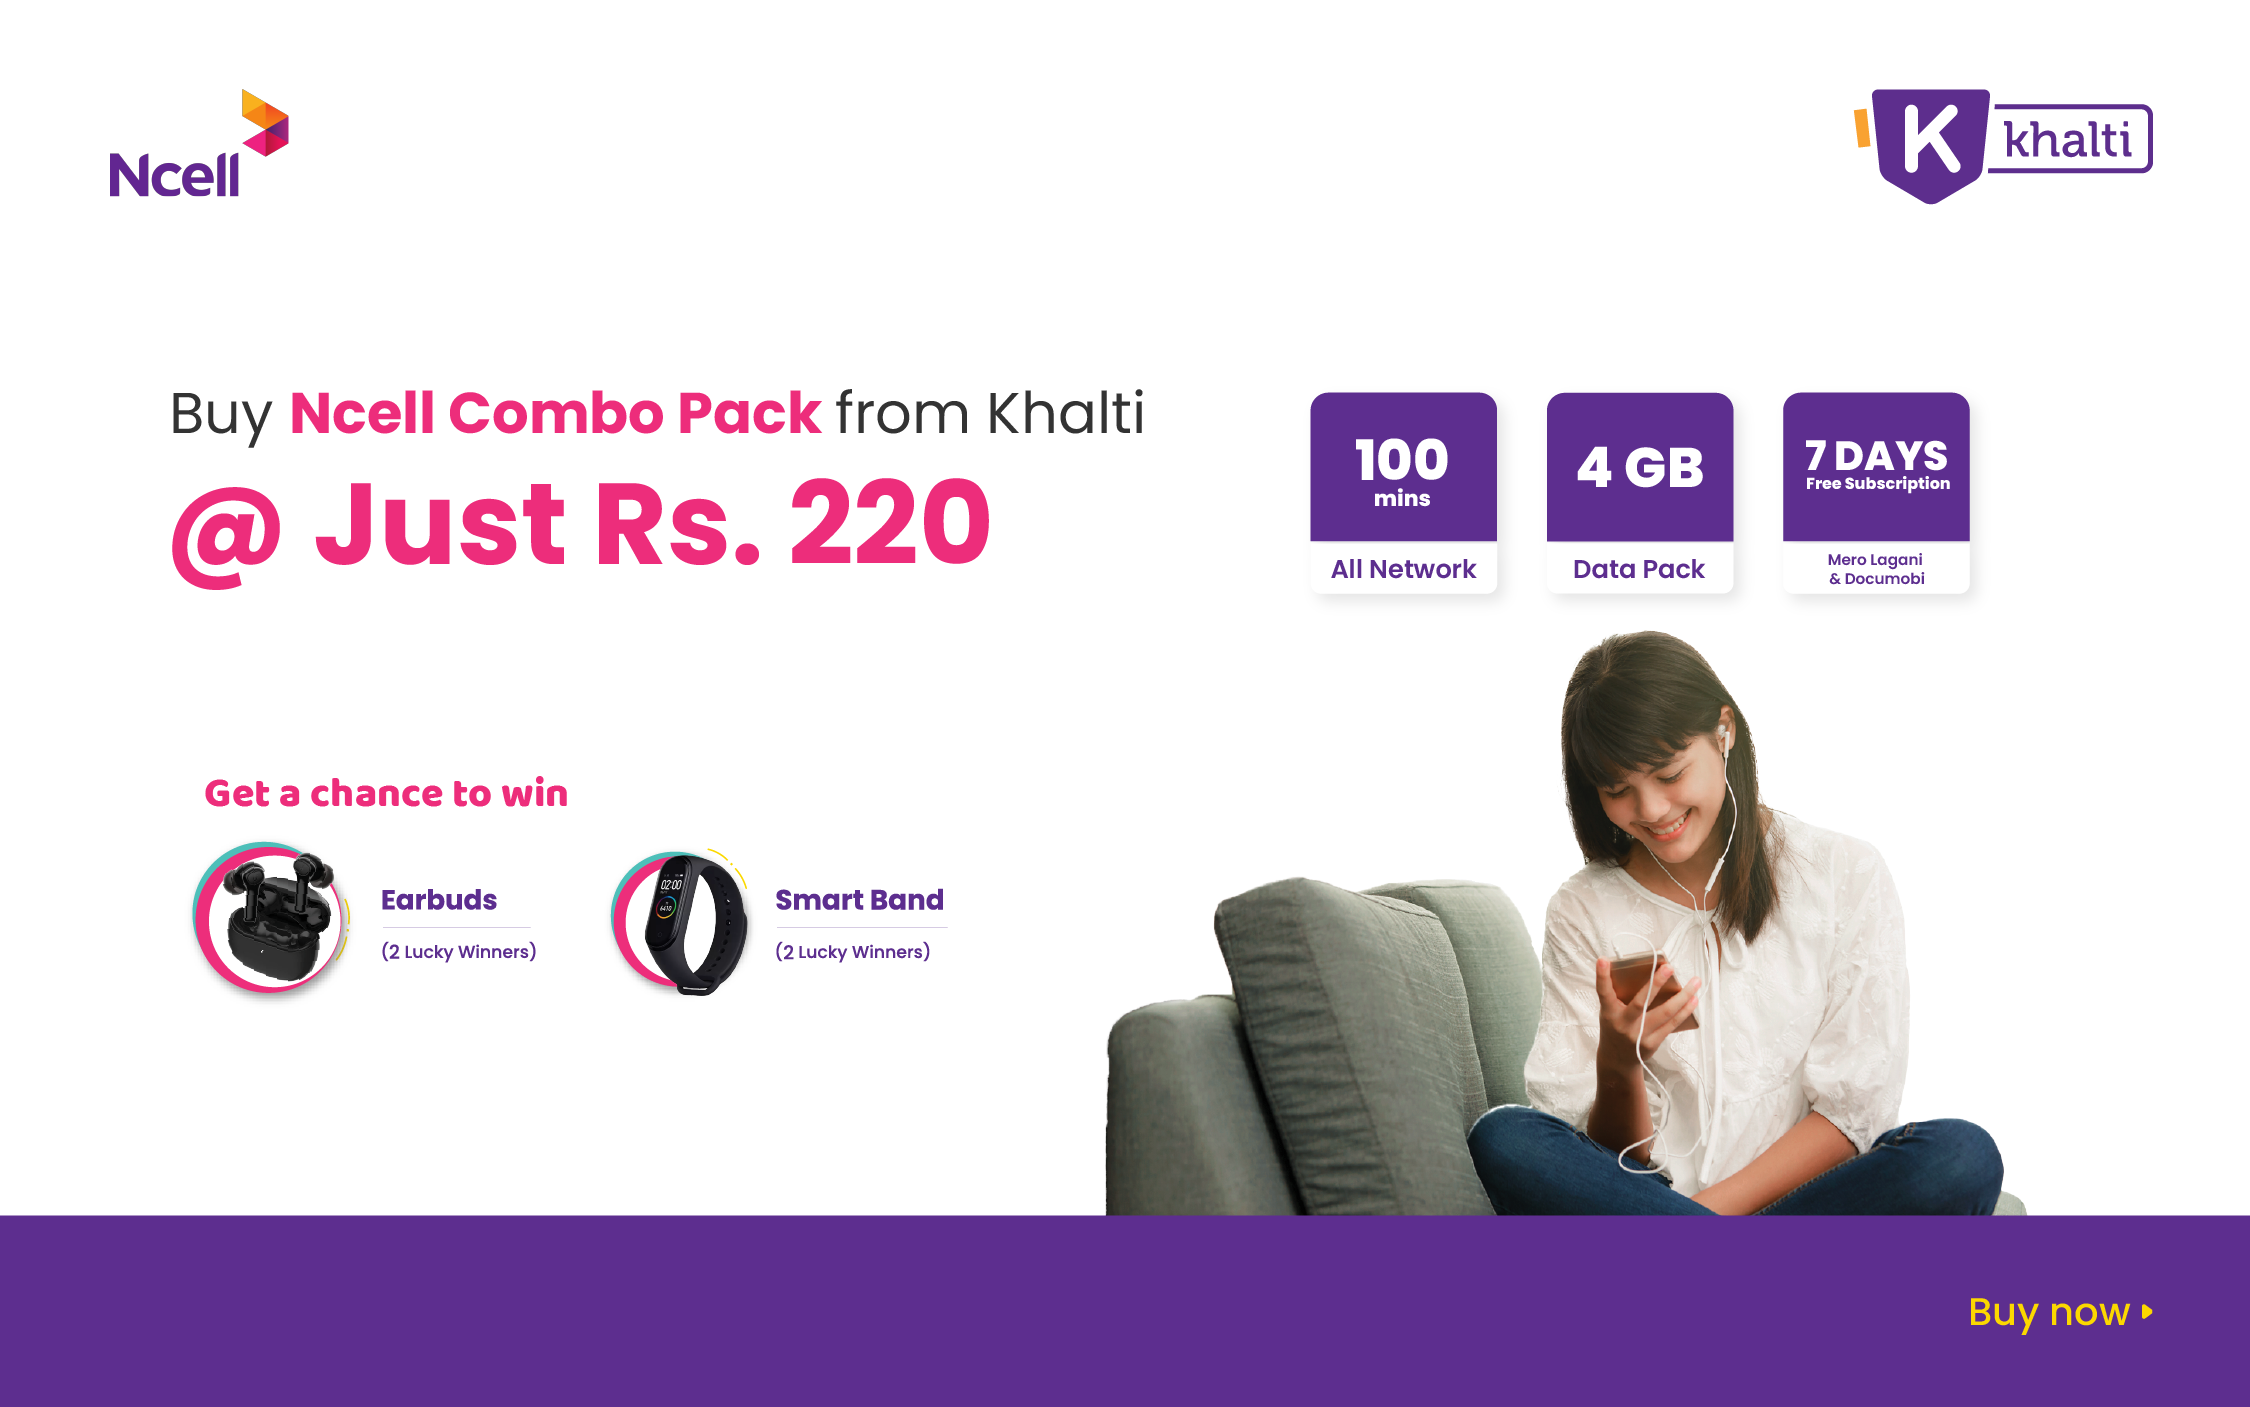 Ncell Combo Pack from Khalti: Weekly Giveaways!